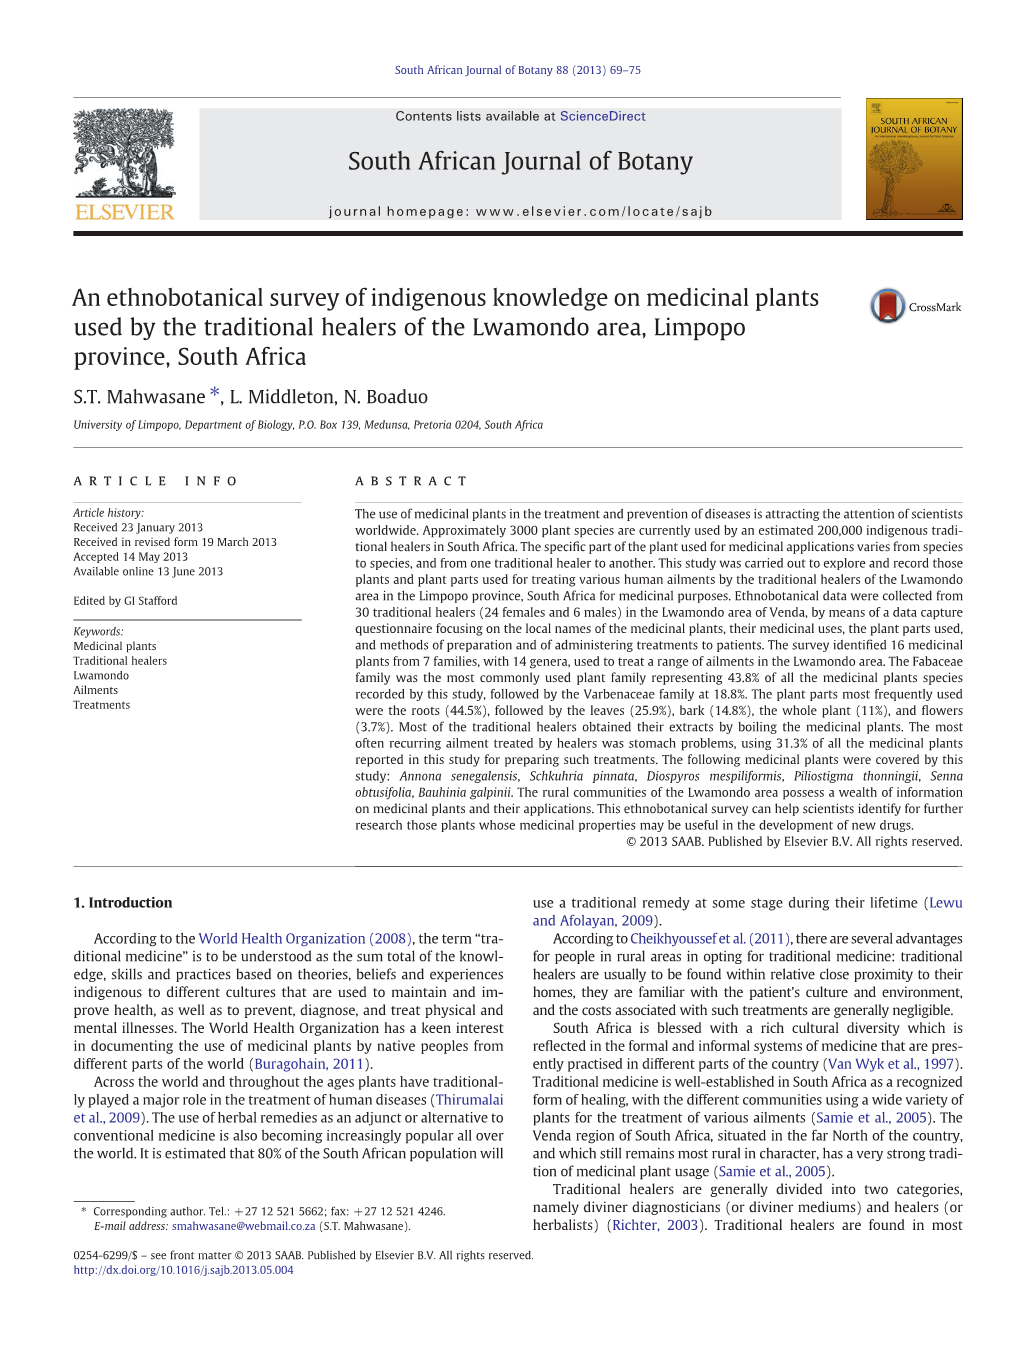 An Ethnobotanical Survey of Indigenous Knowledge on Medicinal Plants Used by the Traditional Healers of the Lwamondo Area, Limpopo Province, South Africa